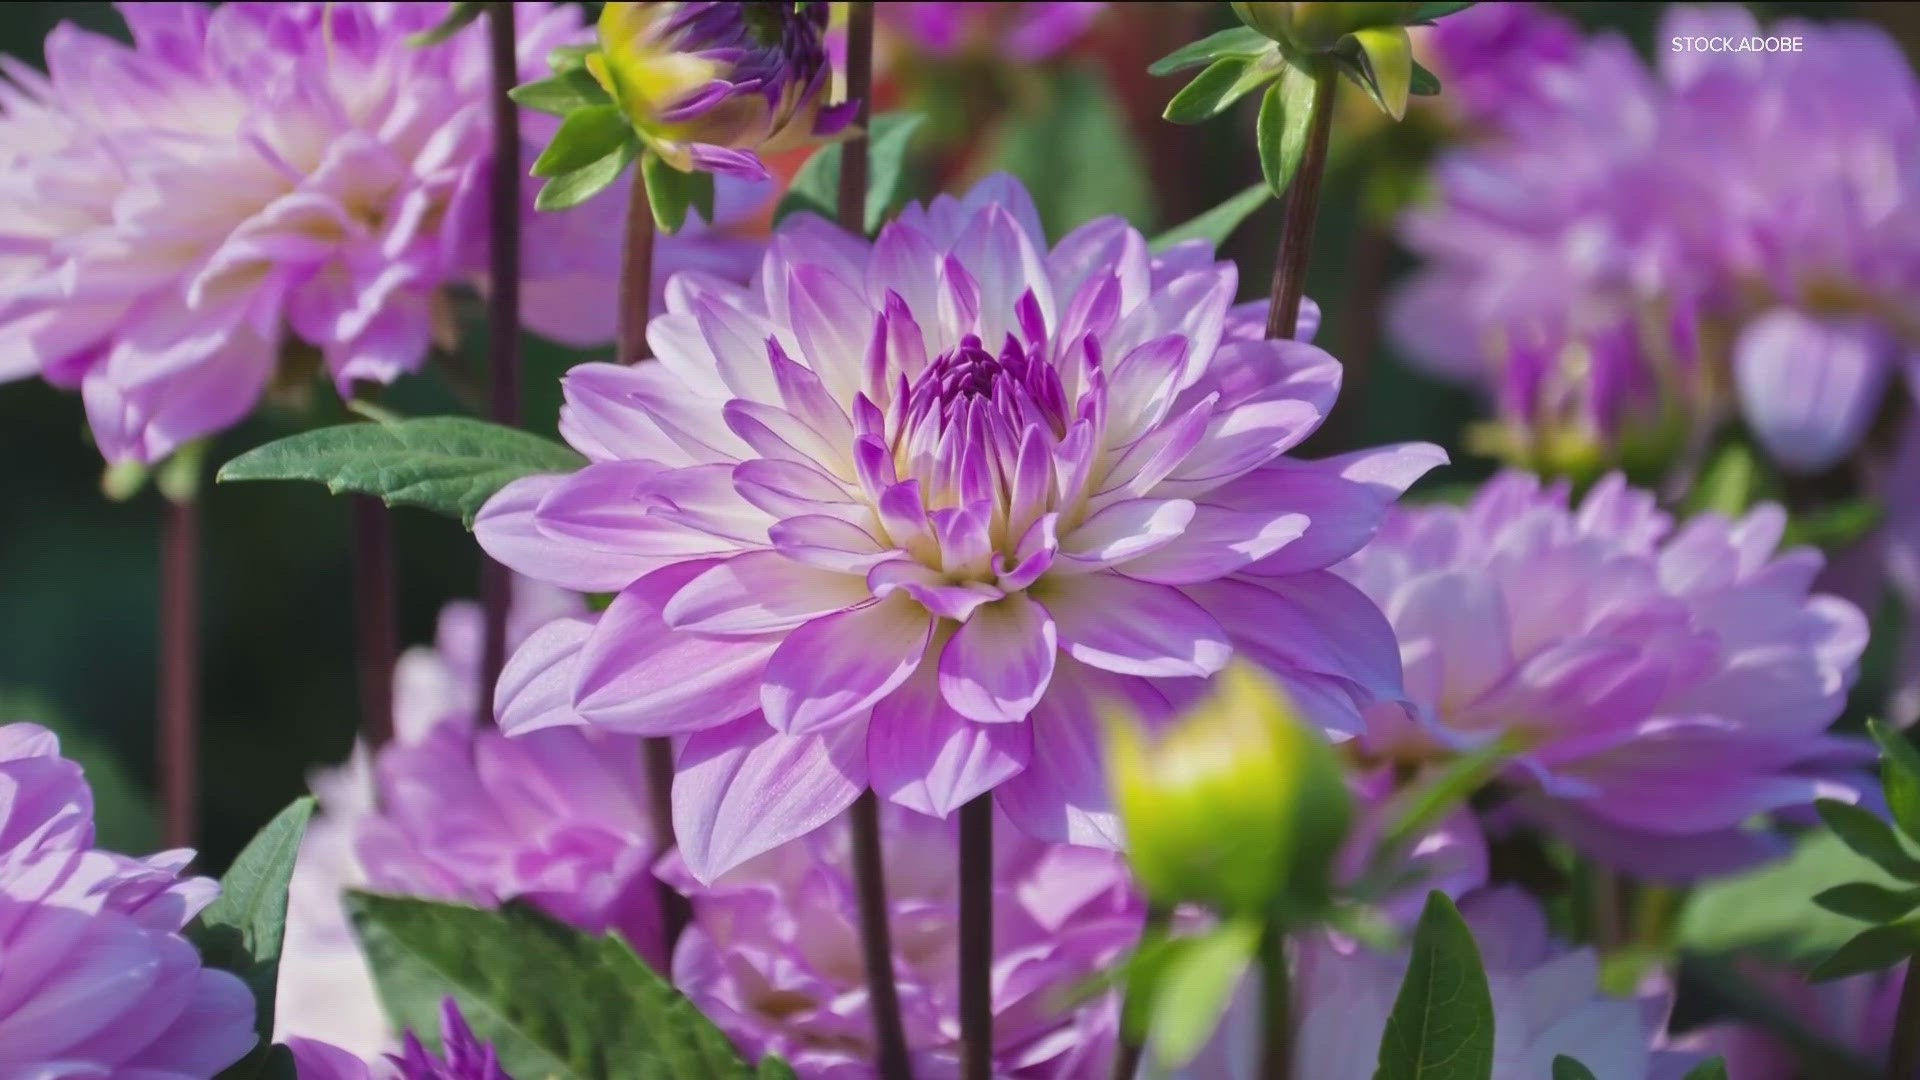 Dahlias come in lots of different shapes, sizes and colors, blooming from mid-summer until frost.